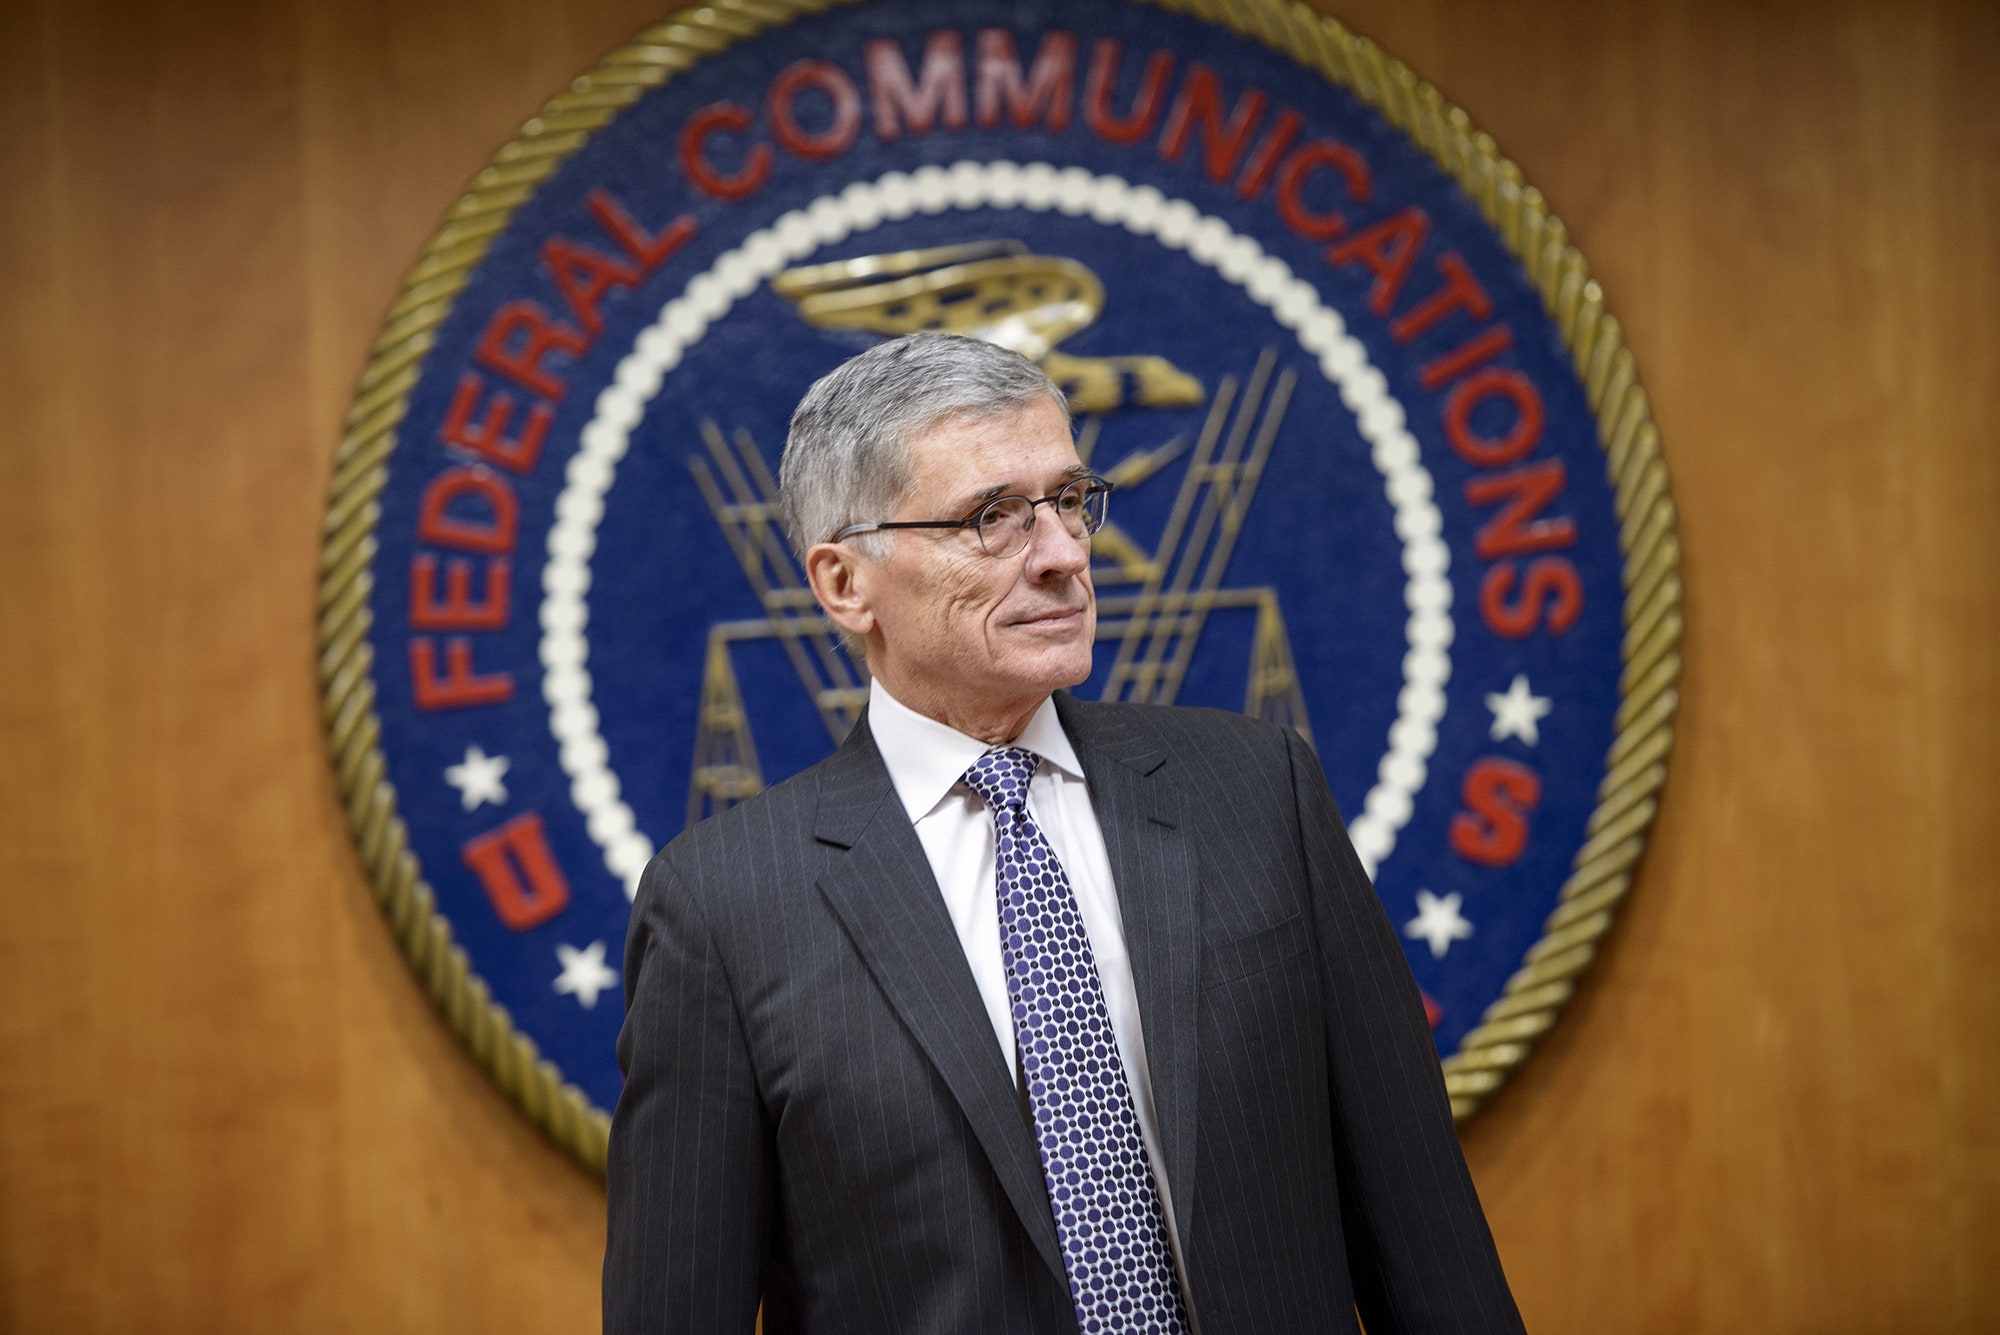 Federal Communication Commission Chairman Tom Wheeler waits for a hearing at the FCC December 11 2014 in Washington DC.